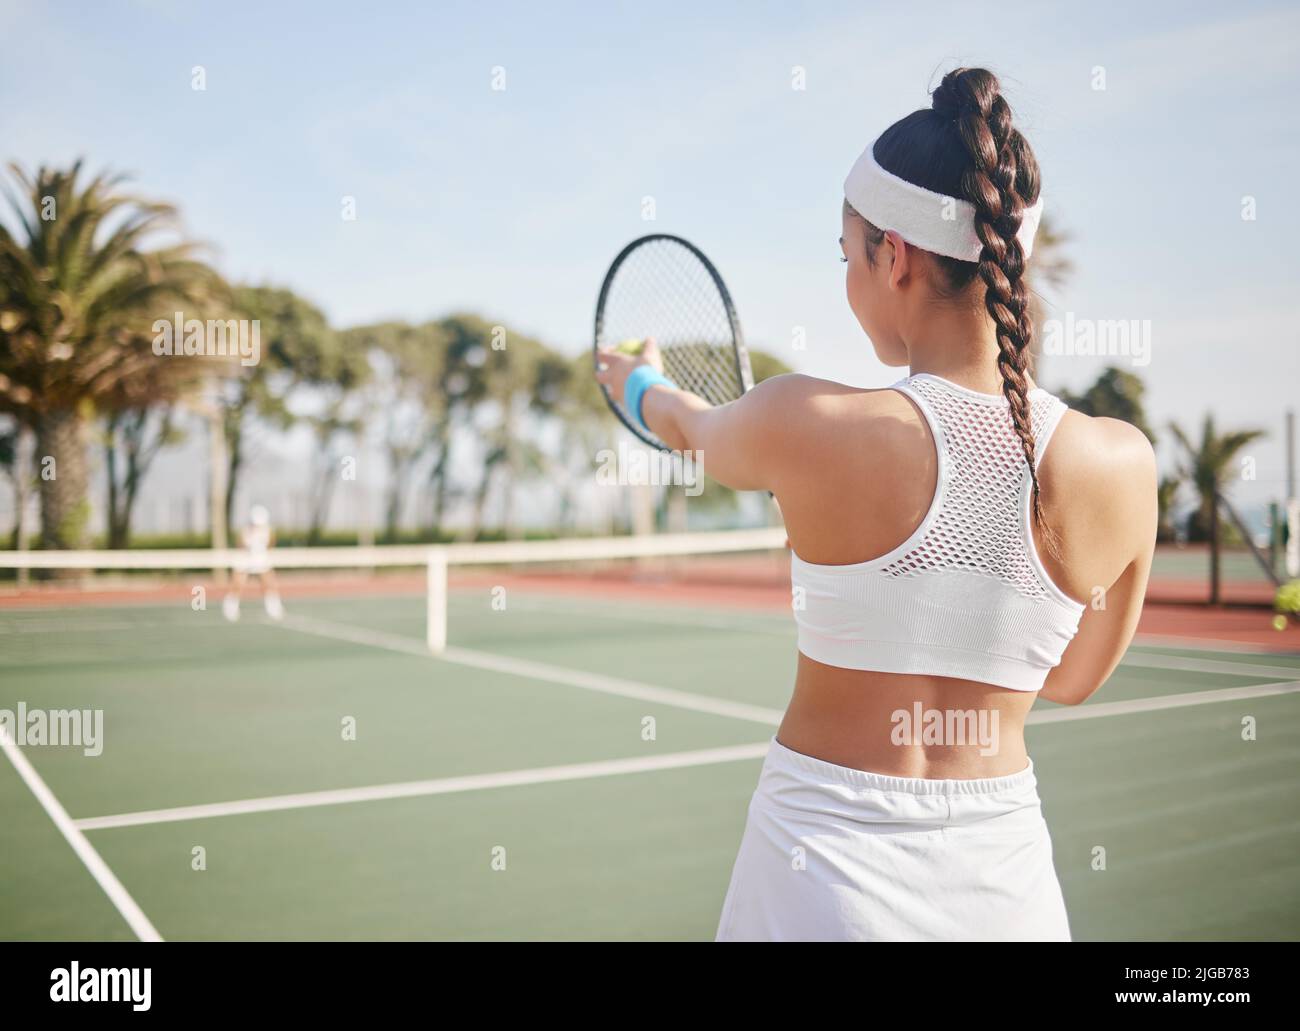 I know exactly where I want this ball to go. an unrecognisable tennis player standing on the court and getting ready to serve during practice. Stock Photo